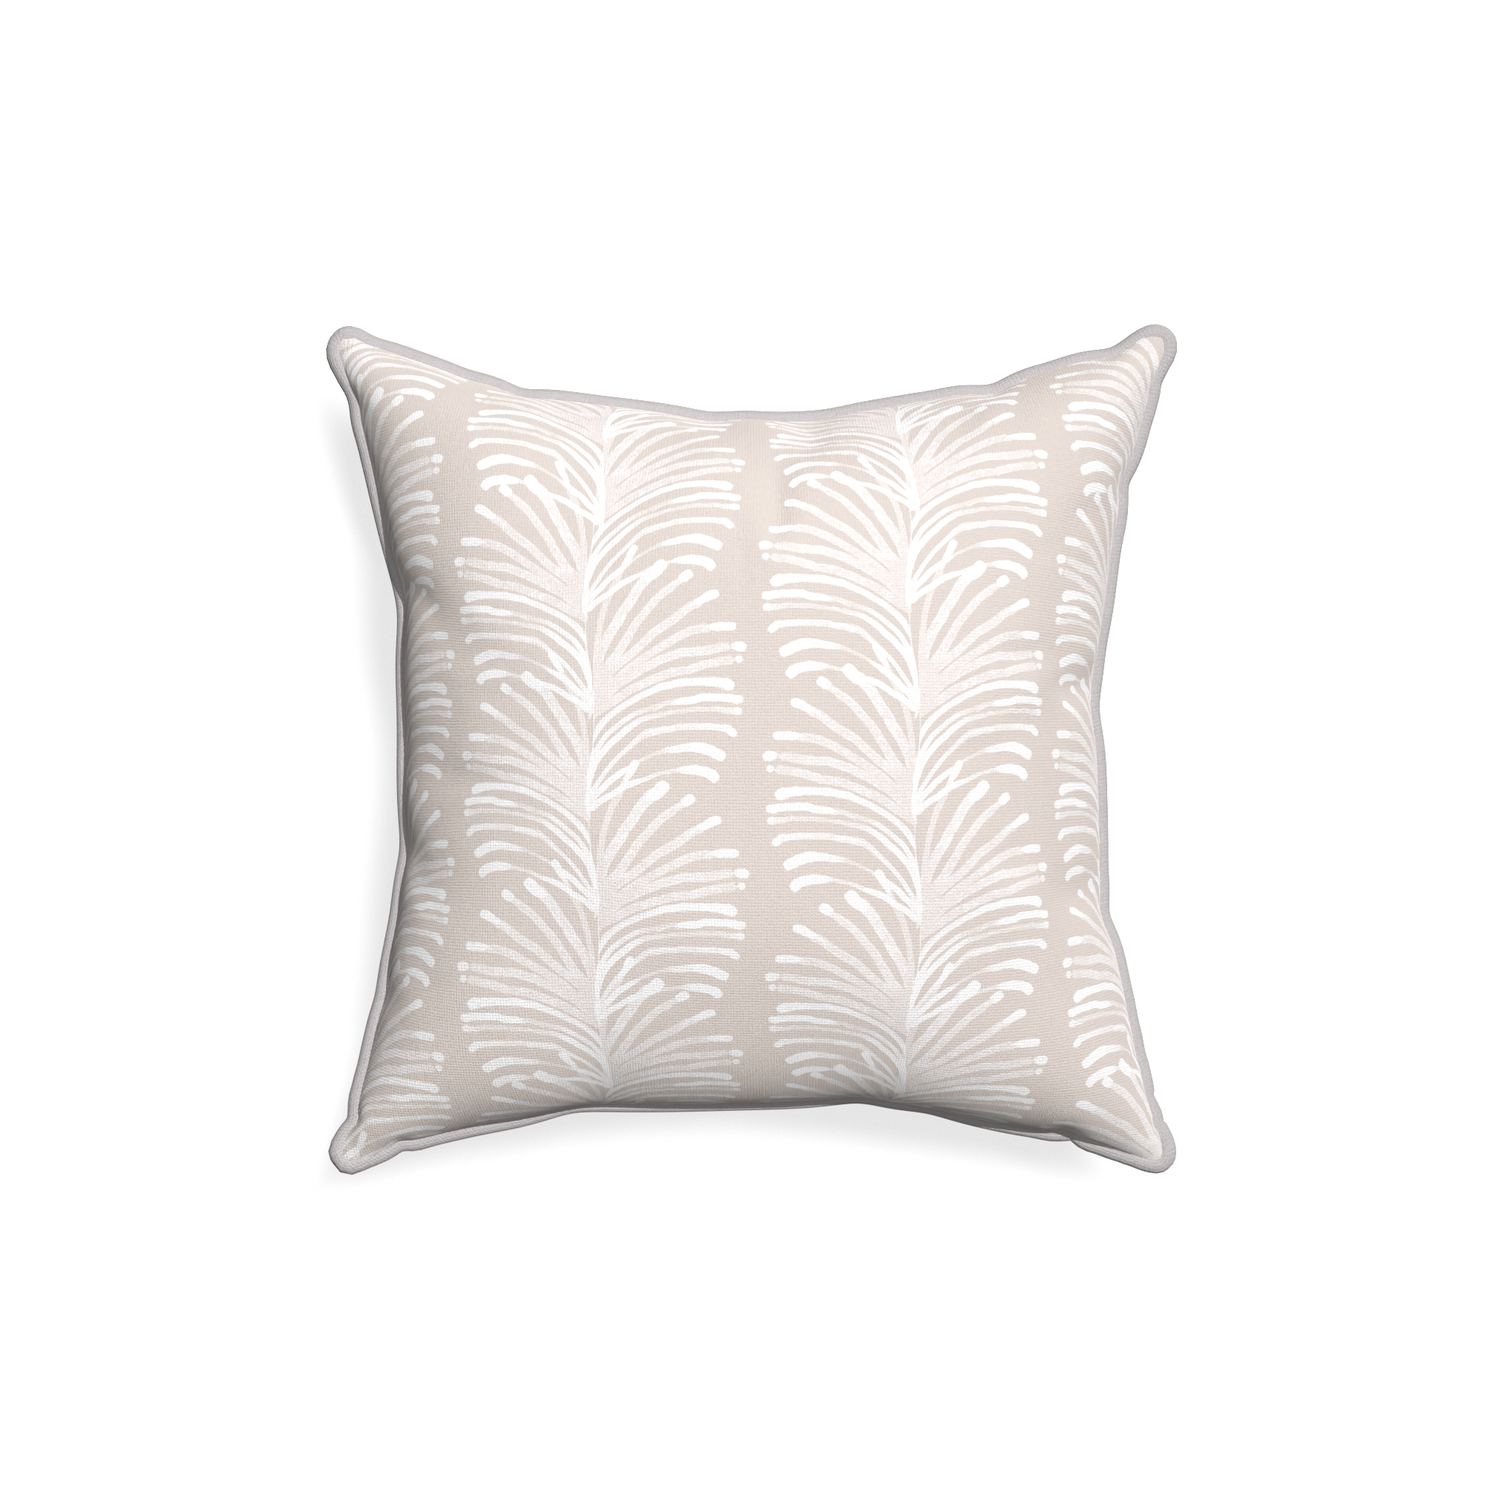 18-square emma sand custom sand colored botanical stripepillow with pebble piping on white background